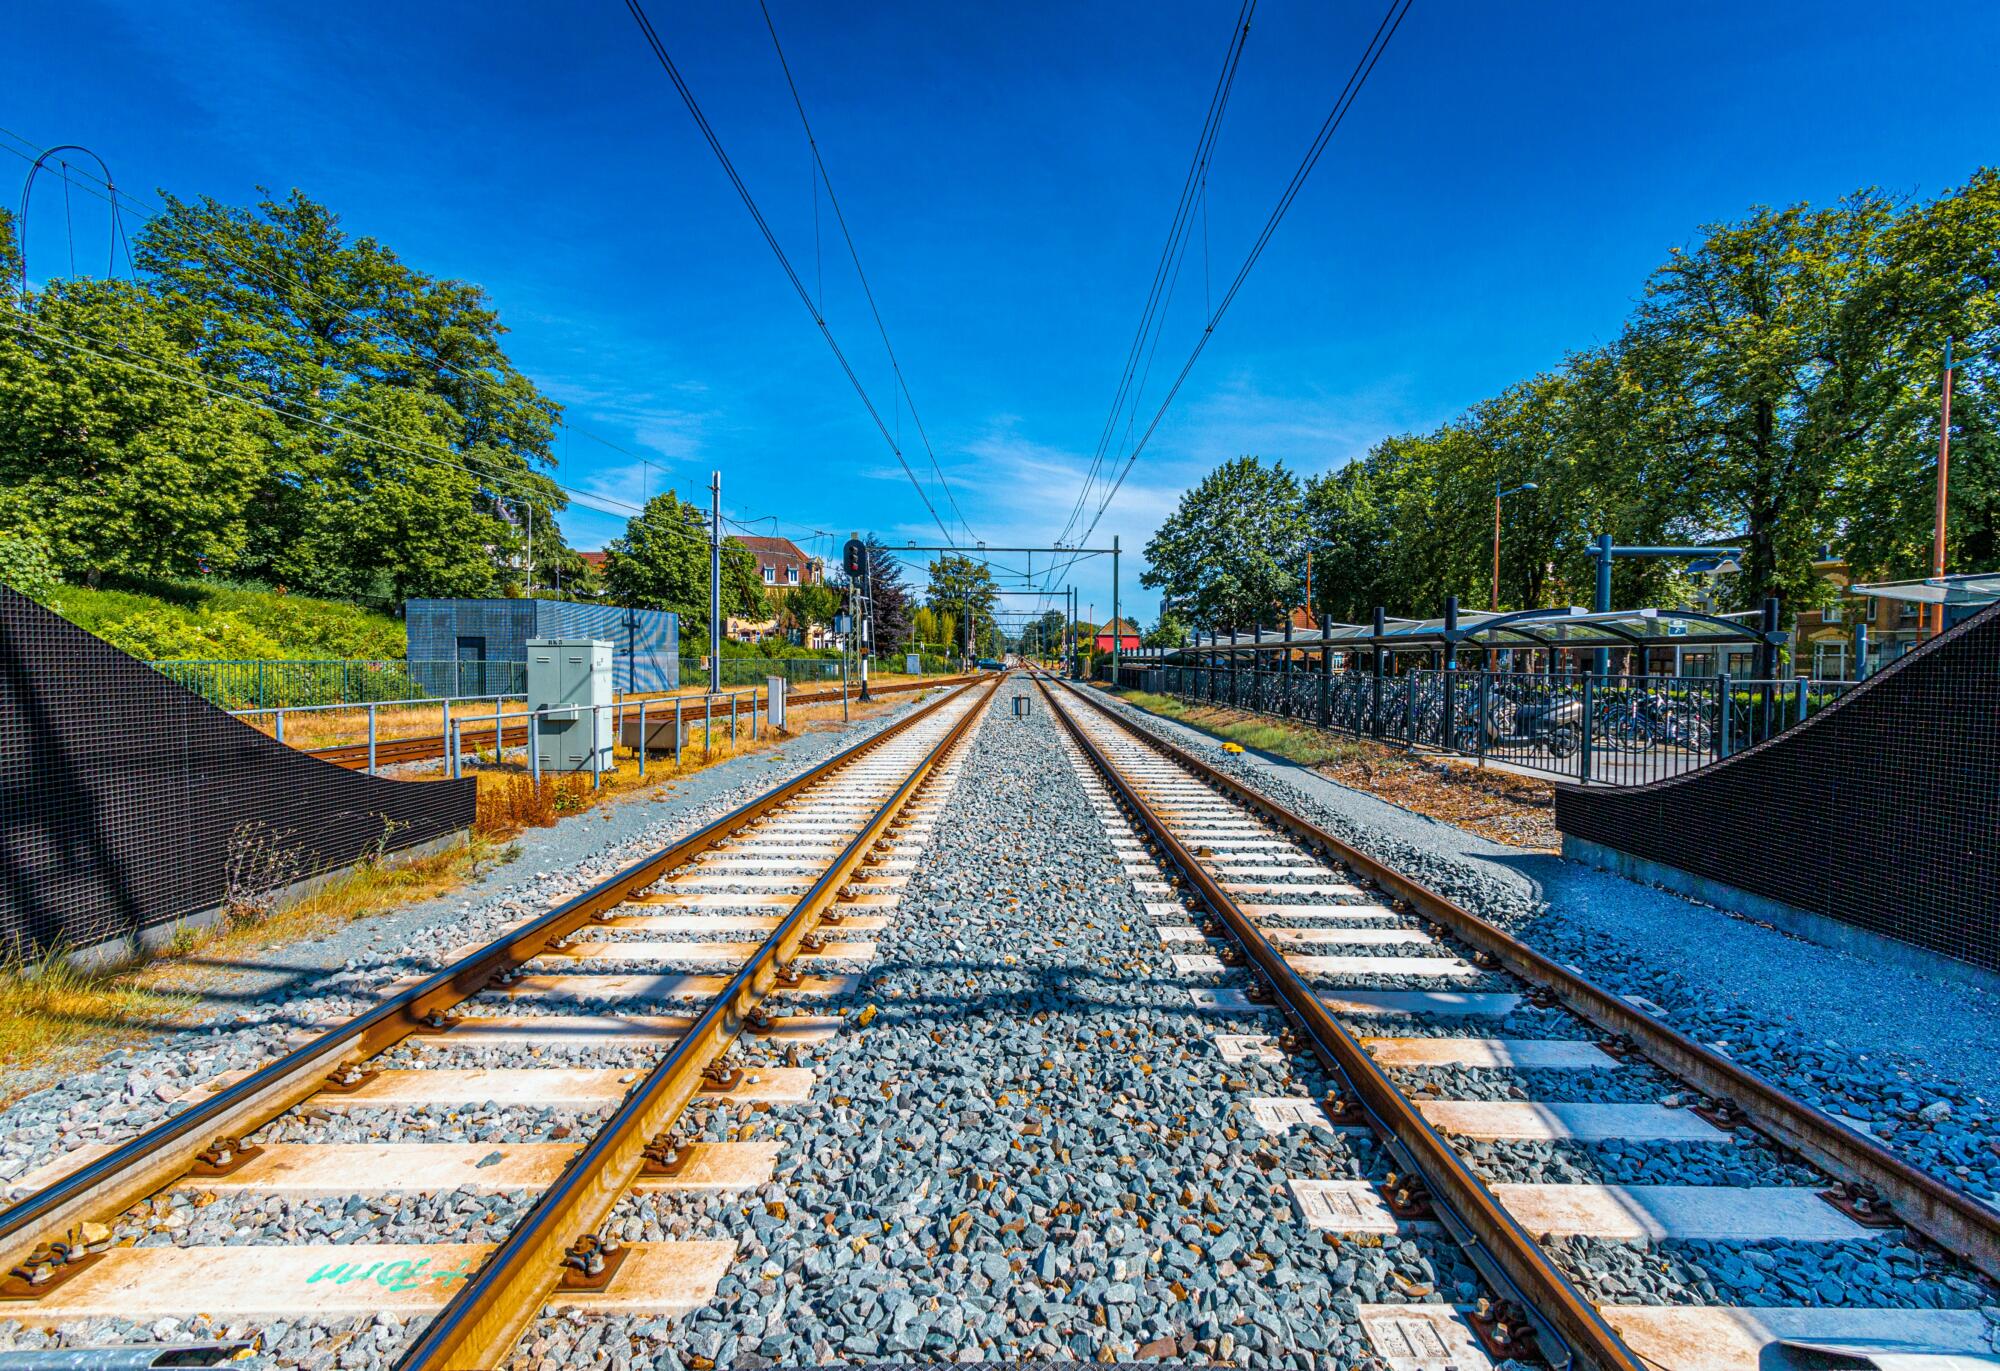 Laying the tracks: Connecting regional, national and international hubs through rail